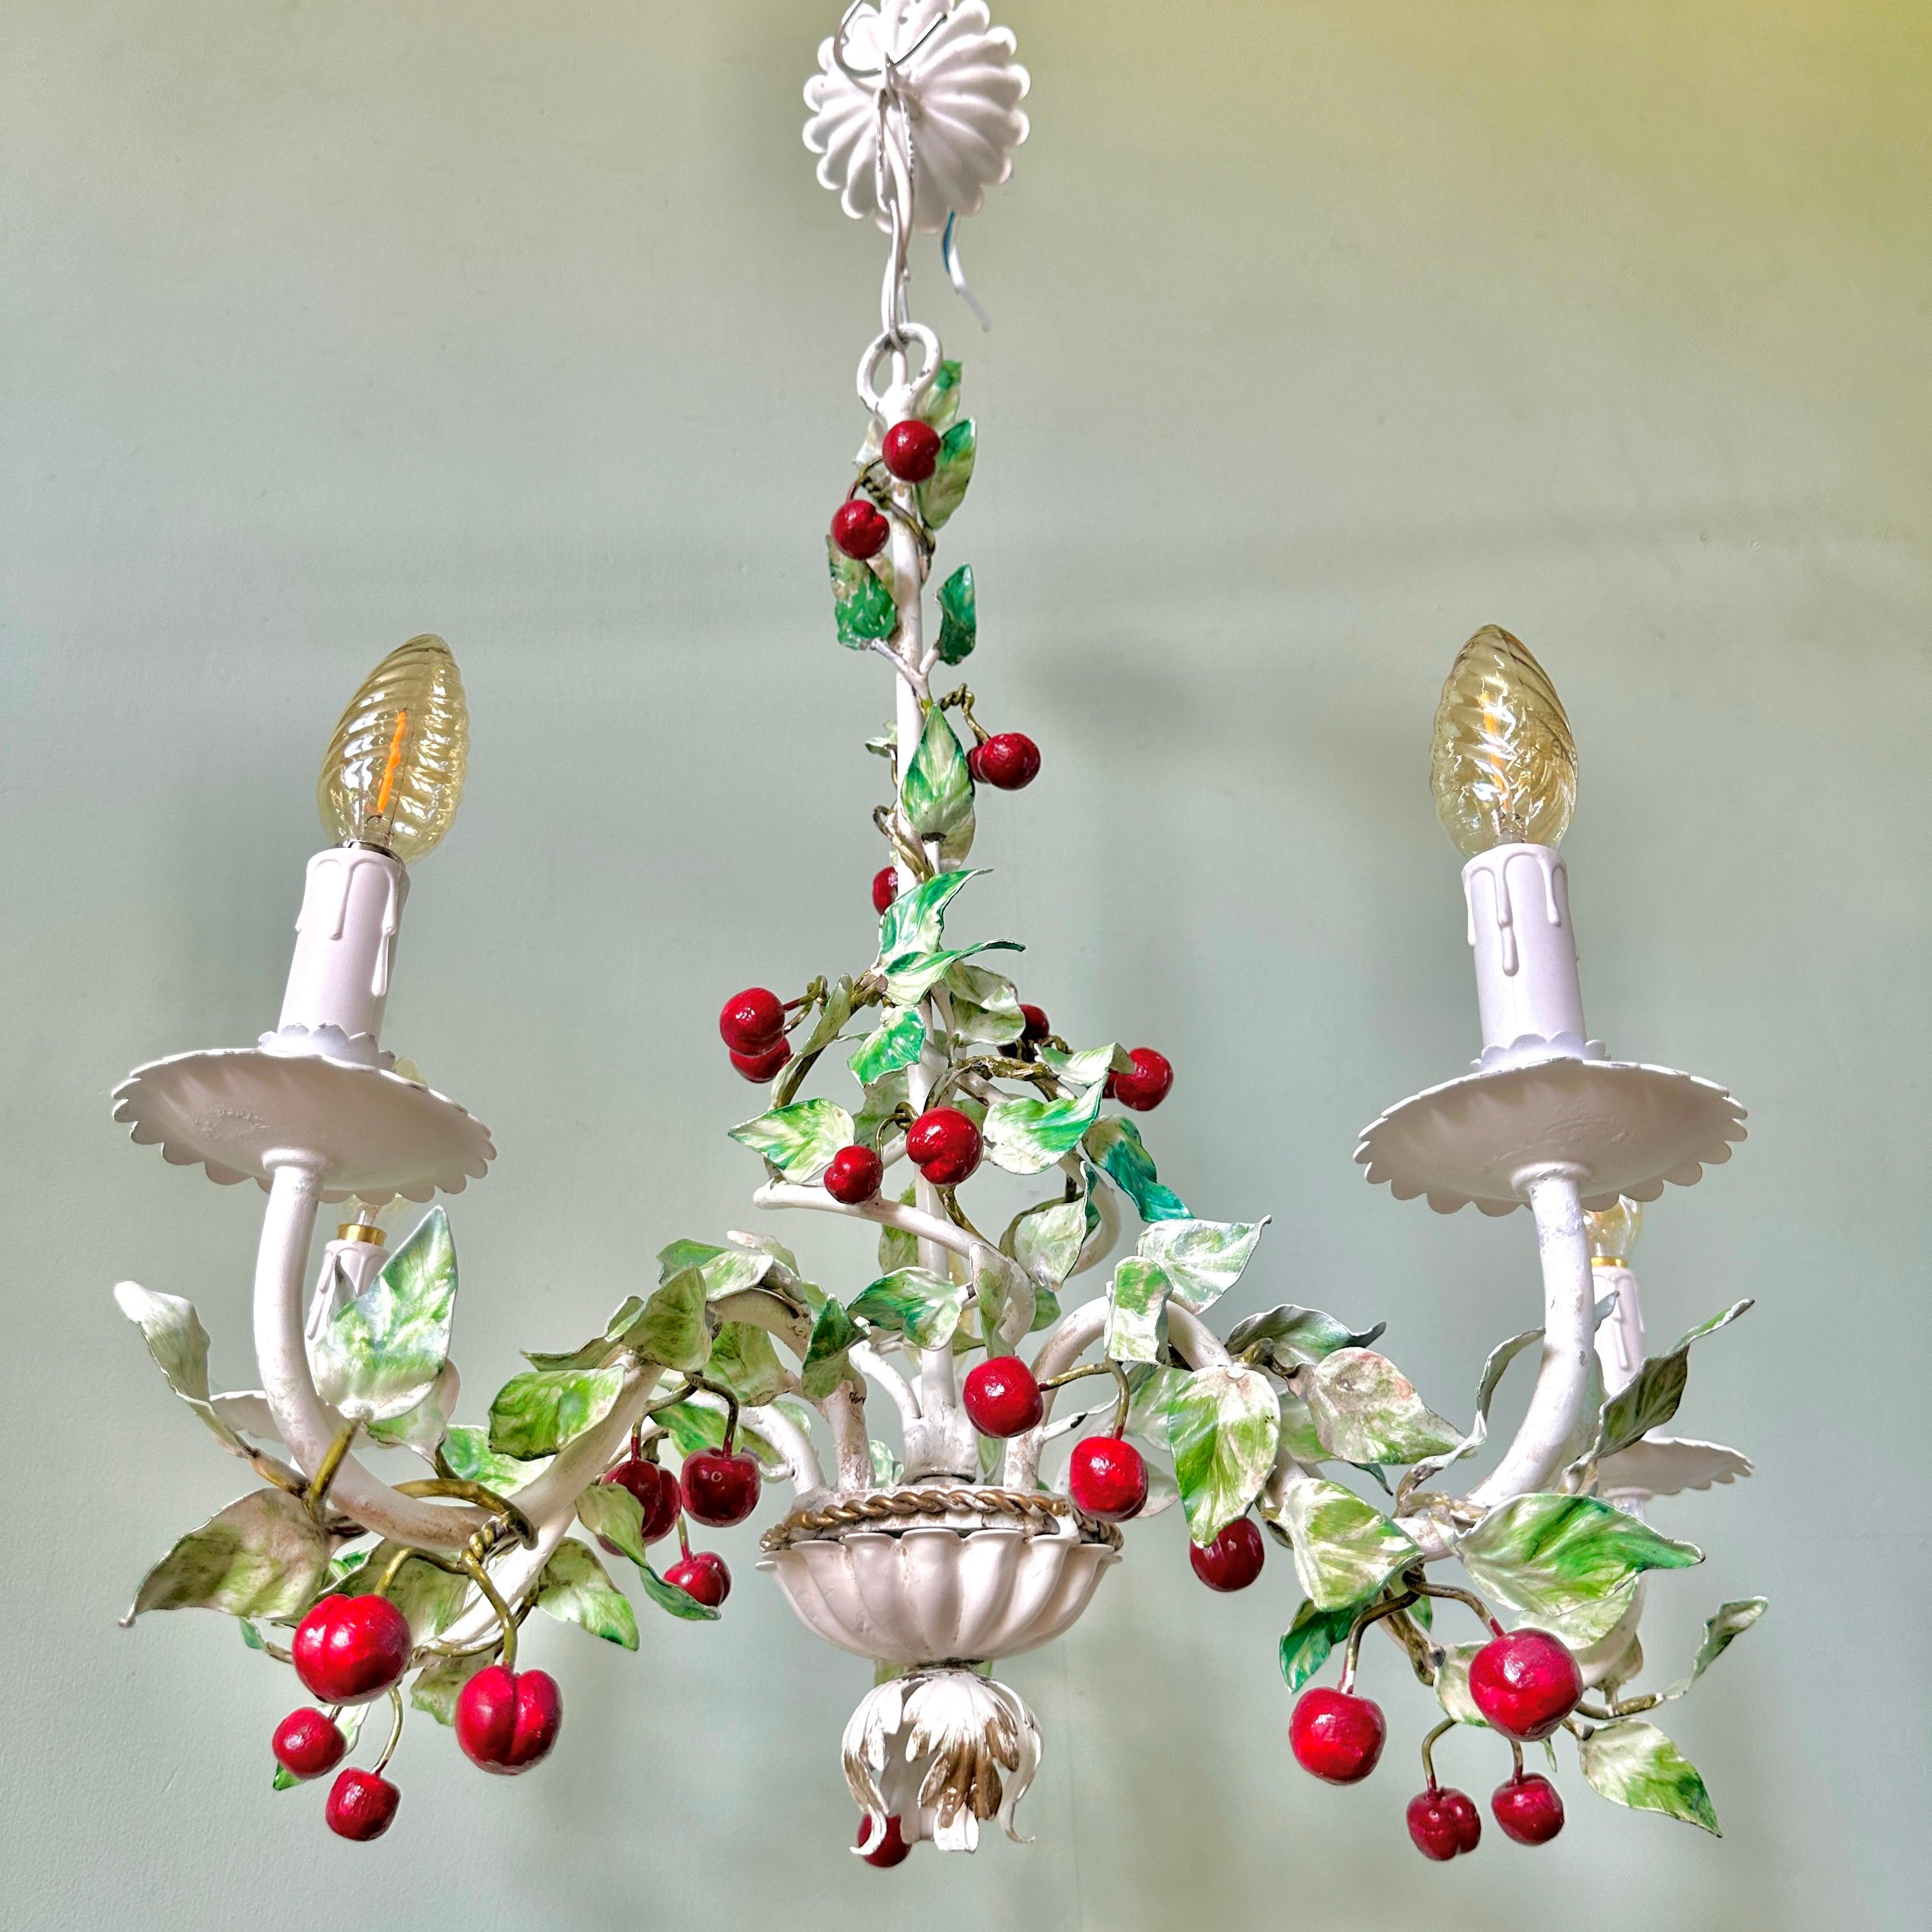 1940s Italian cherry toleware chandelier (1 of 2 available).

Gorgeous hand-painted, five-arm light with scalloped 'drip trays' and decorative base. In very good condition with some light and desirable wear. The chandelier has been rewired, fitted